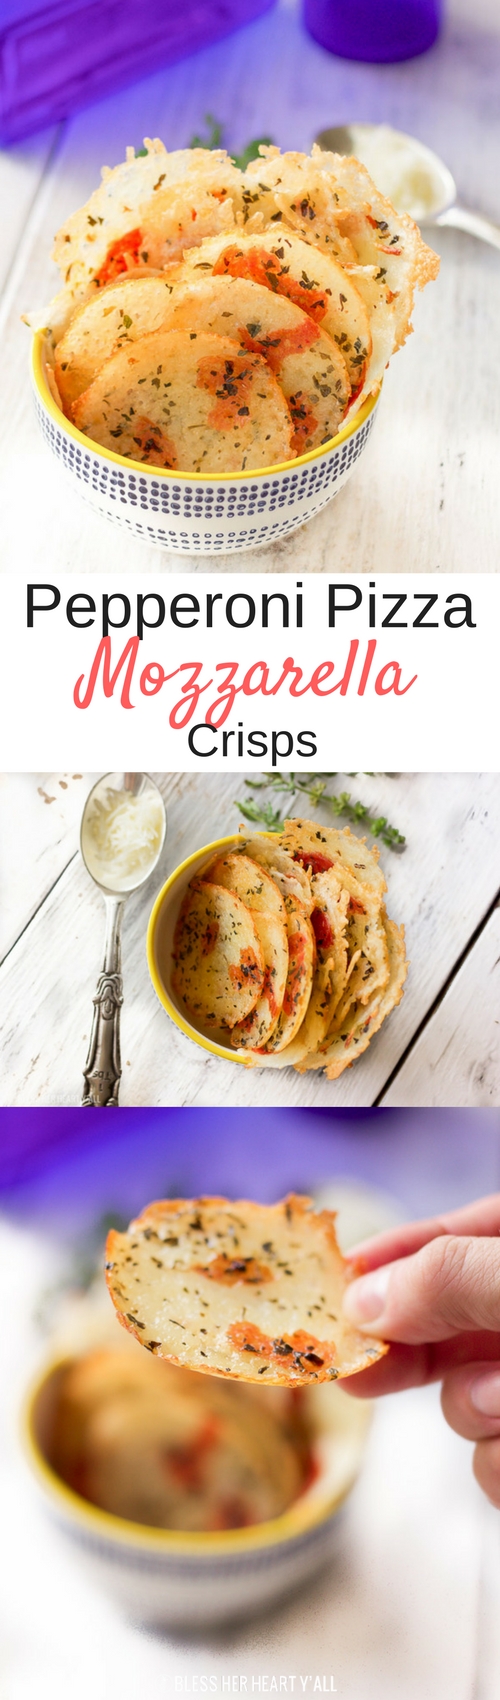 These pepperoni pizza mozzarella crisps are the perfect little dippable appetizer or snack. Shredded mozzarella cheese is quickly baked with pepperoni pieces, garlic, and basil into crispy addictive bites that are easily dunkable into your favorite marinara sauce!